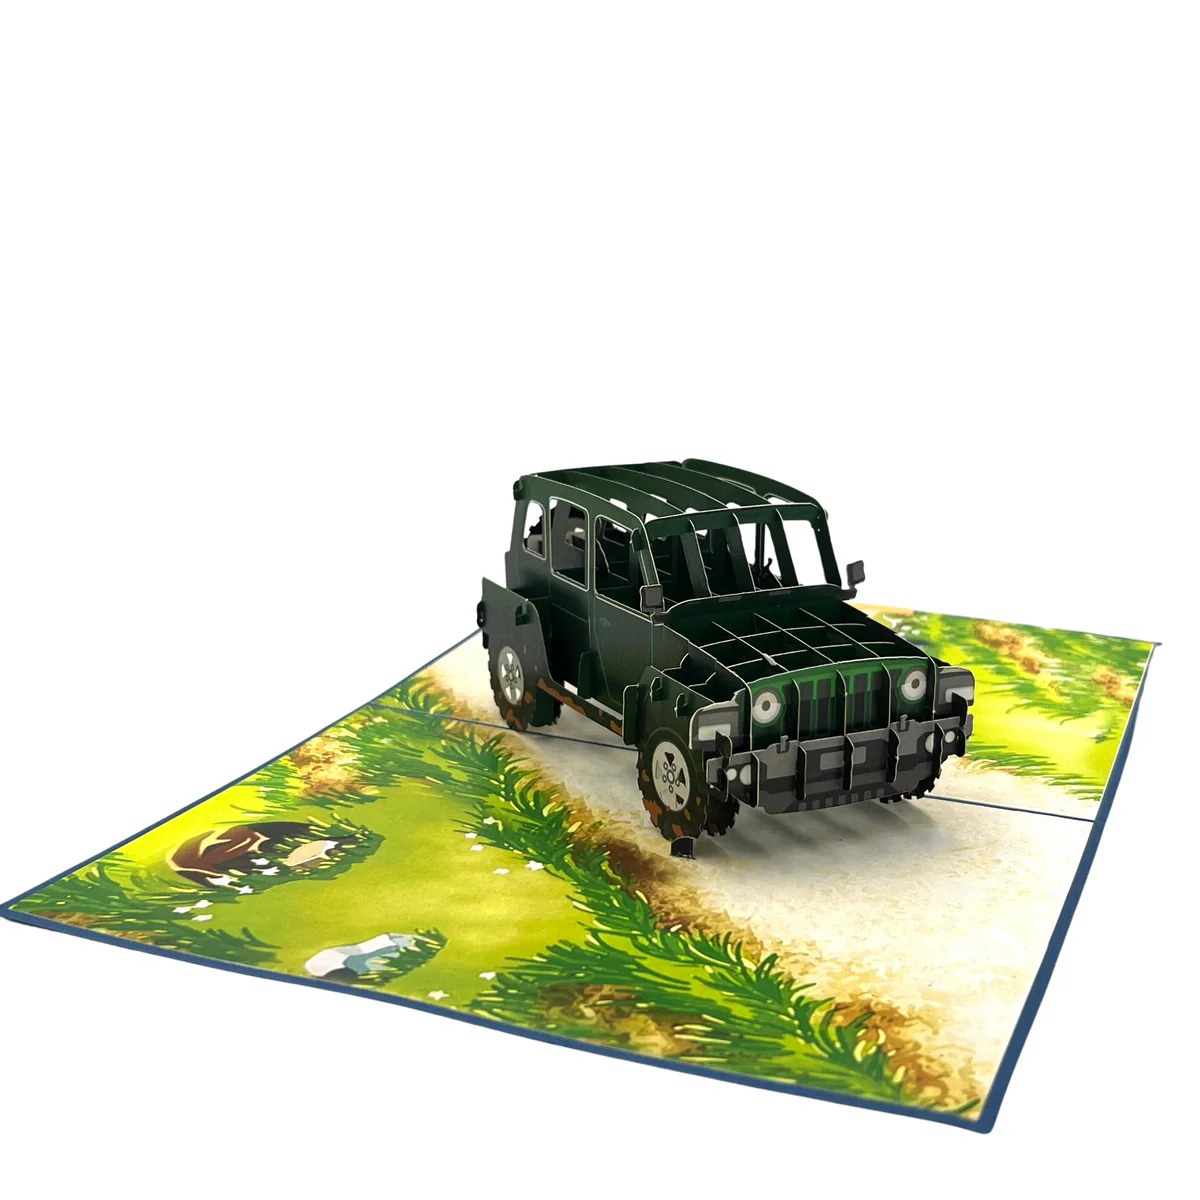 worldpopcards green jeep 3d pop up card for dad 2